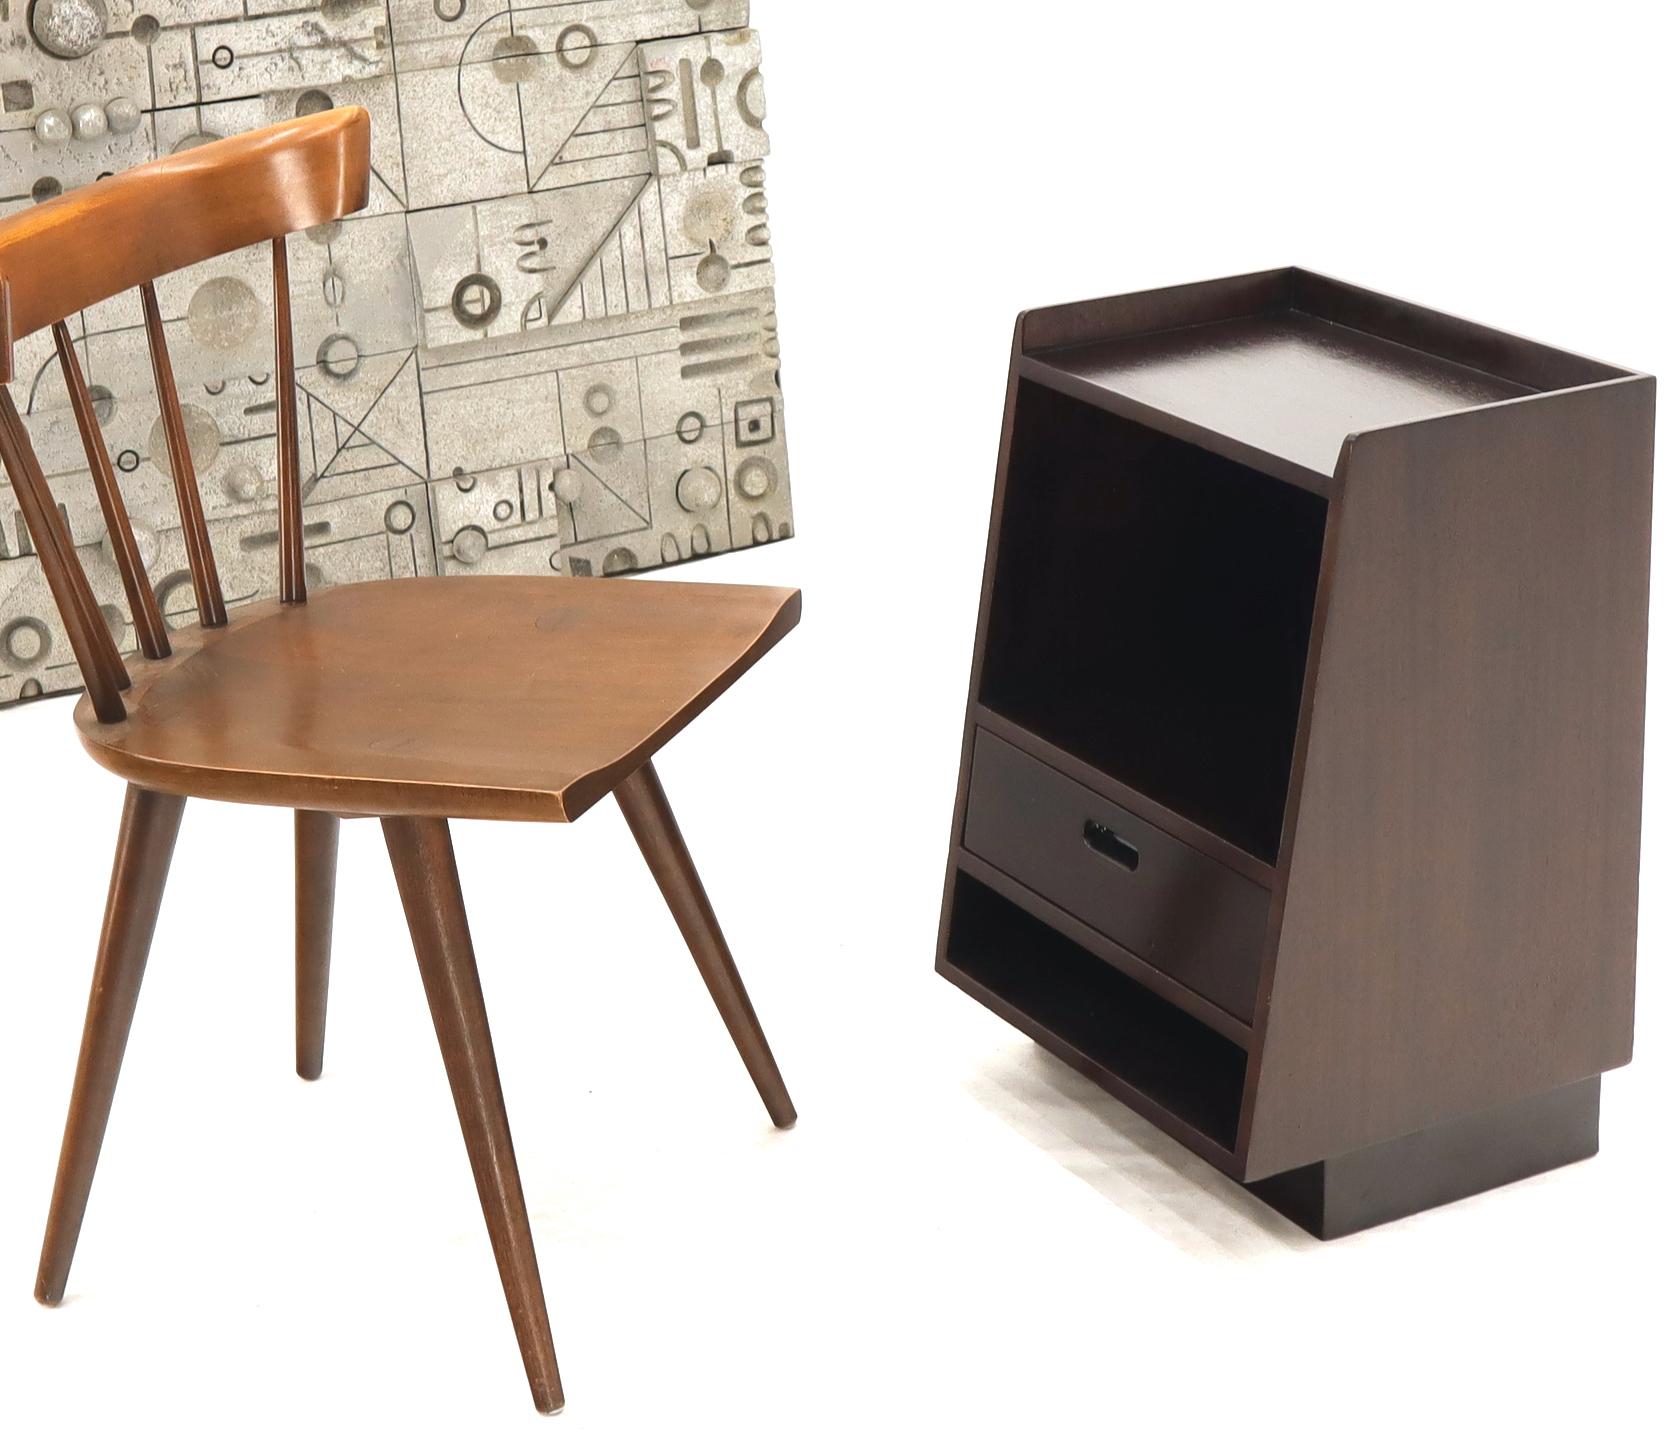 Pair if expresso finish mahogany nightstands by Edward Warmley for Dunbar on lacquered leather bases.